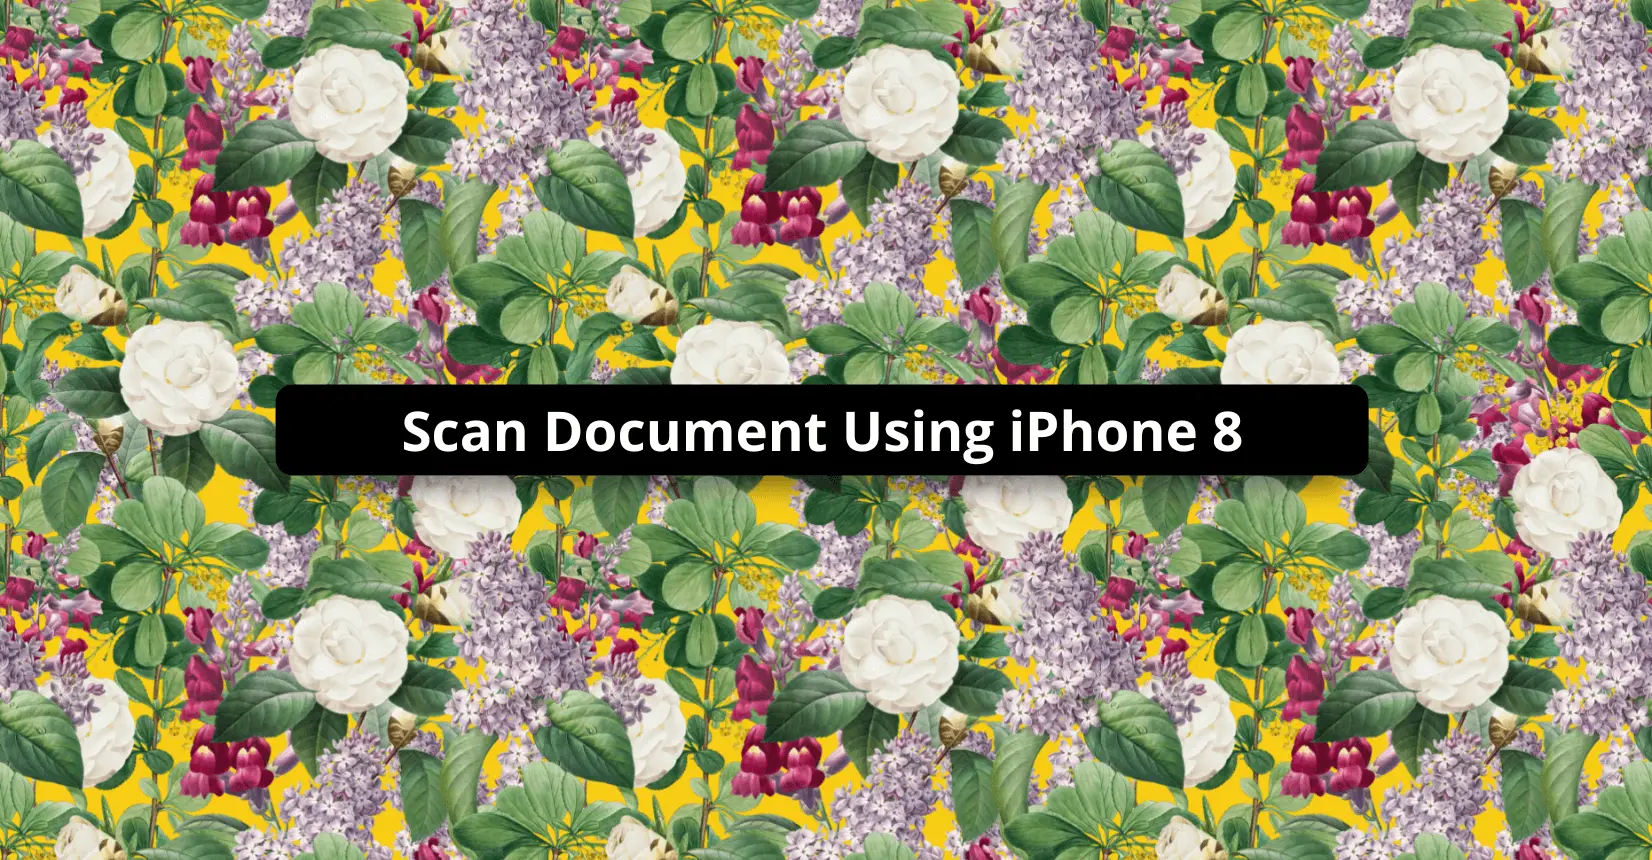 Scan Document Using iPhone 8